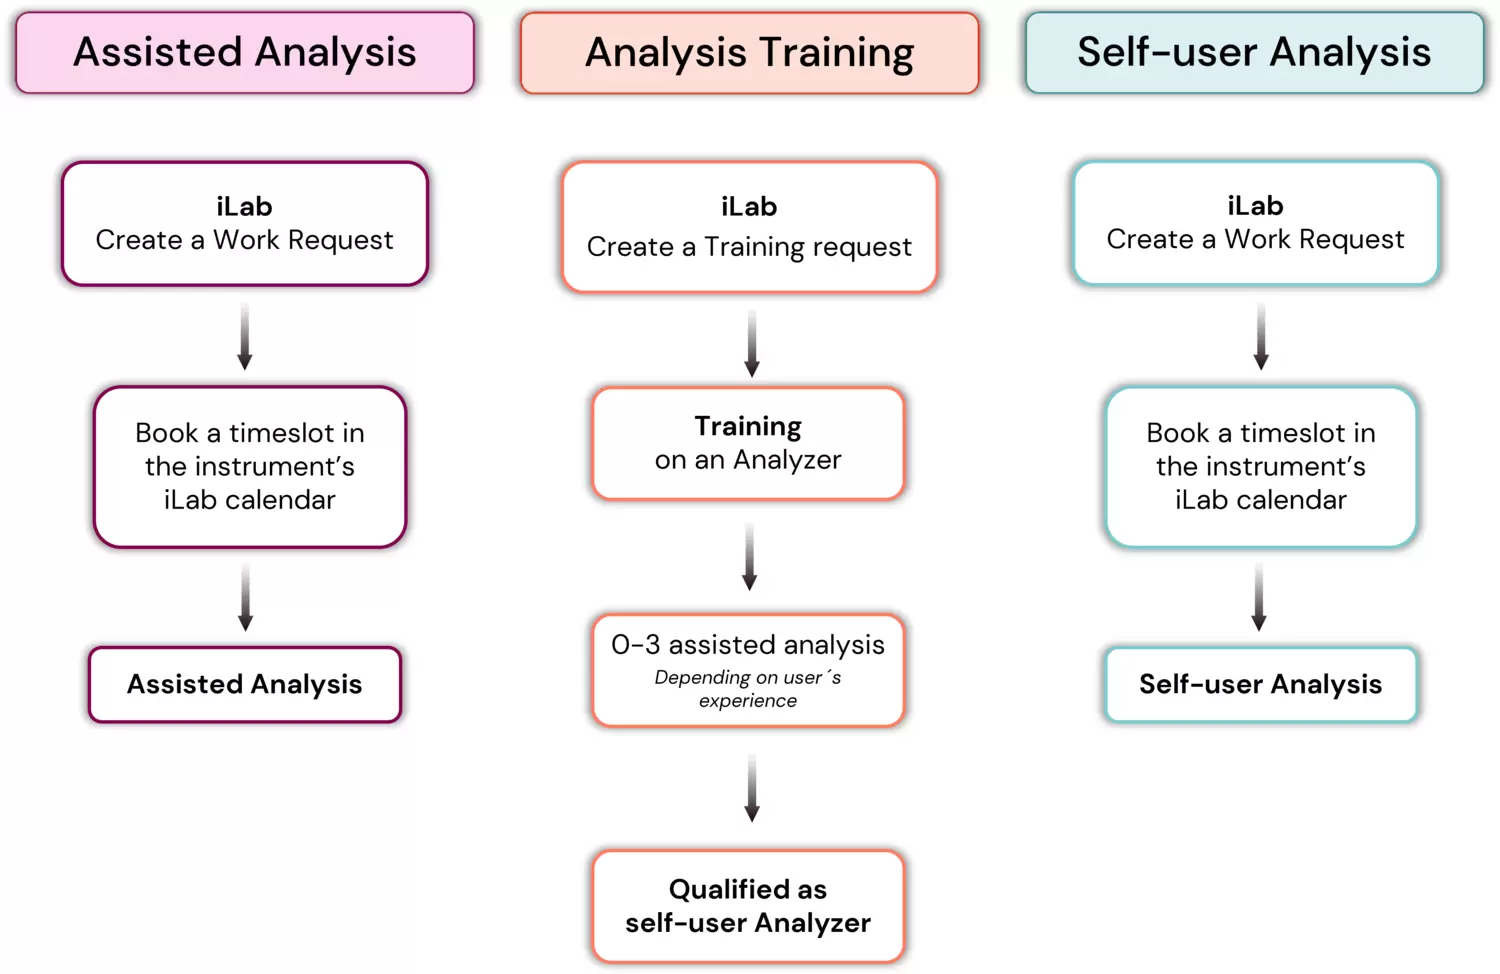 Workflow analysis for different kinds of users/clients (assisted or self-user analysis).